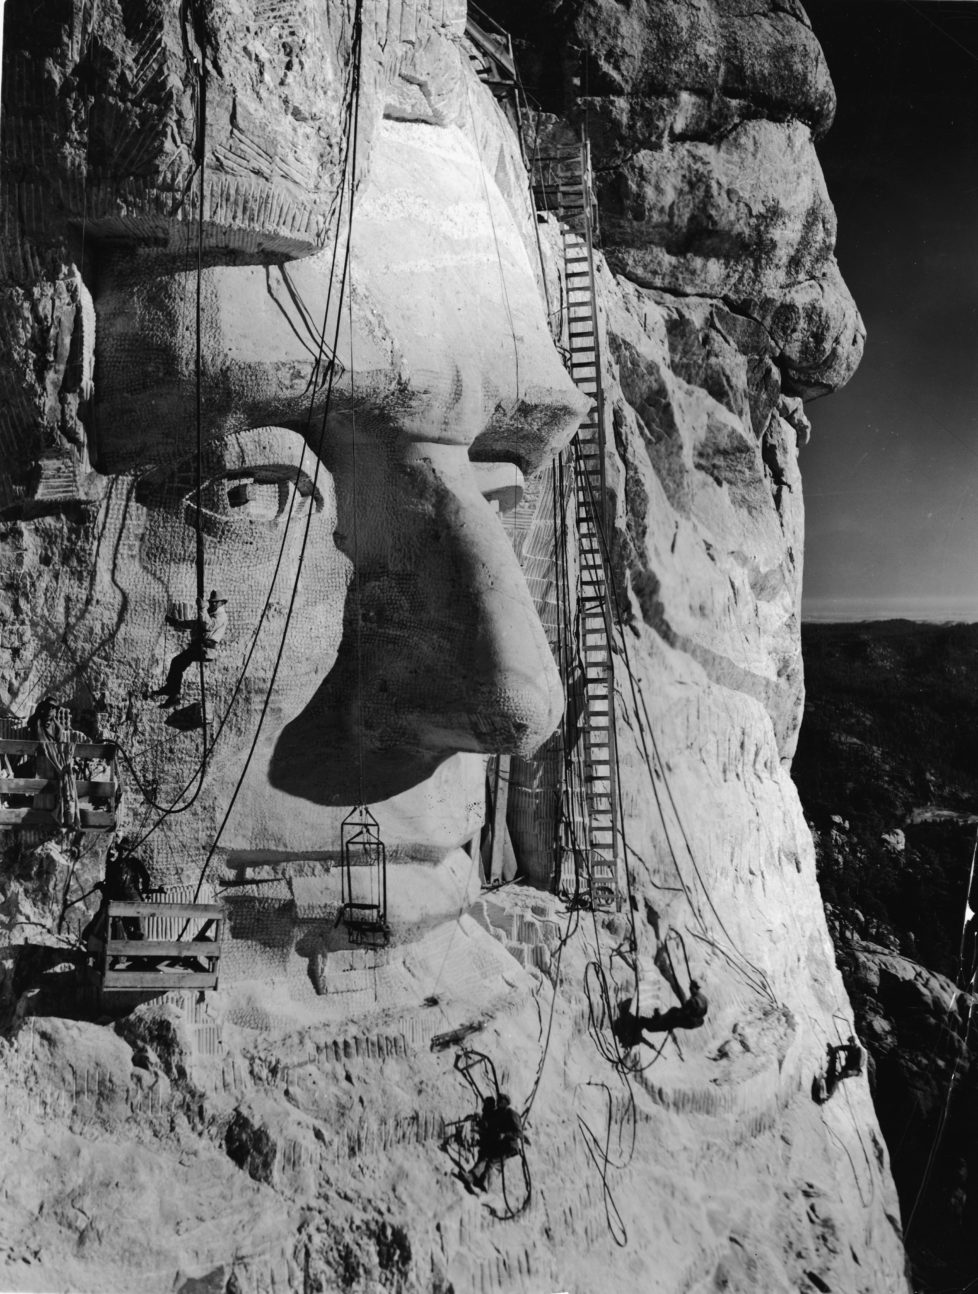 American sculptor Gutzon Borglum (1867 - 1941) (hanging below the eye) and several of his crew work on carving the head of American President Abraham Lincoln, part of the Mount Rushmore National Memorial, Keystone, South Dakota, 1930s. Lincoln's head, the third head carved, was completed and dedicated on September 17, 1937. (Photo by Frederic Lewis/Getty Images)